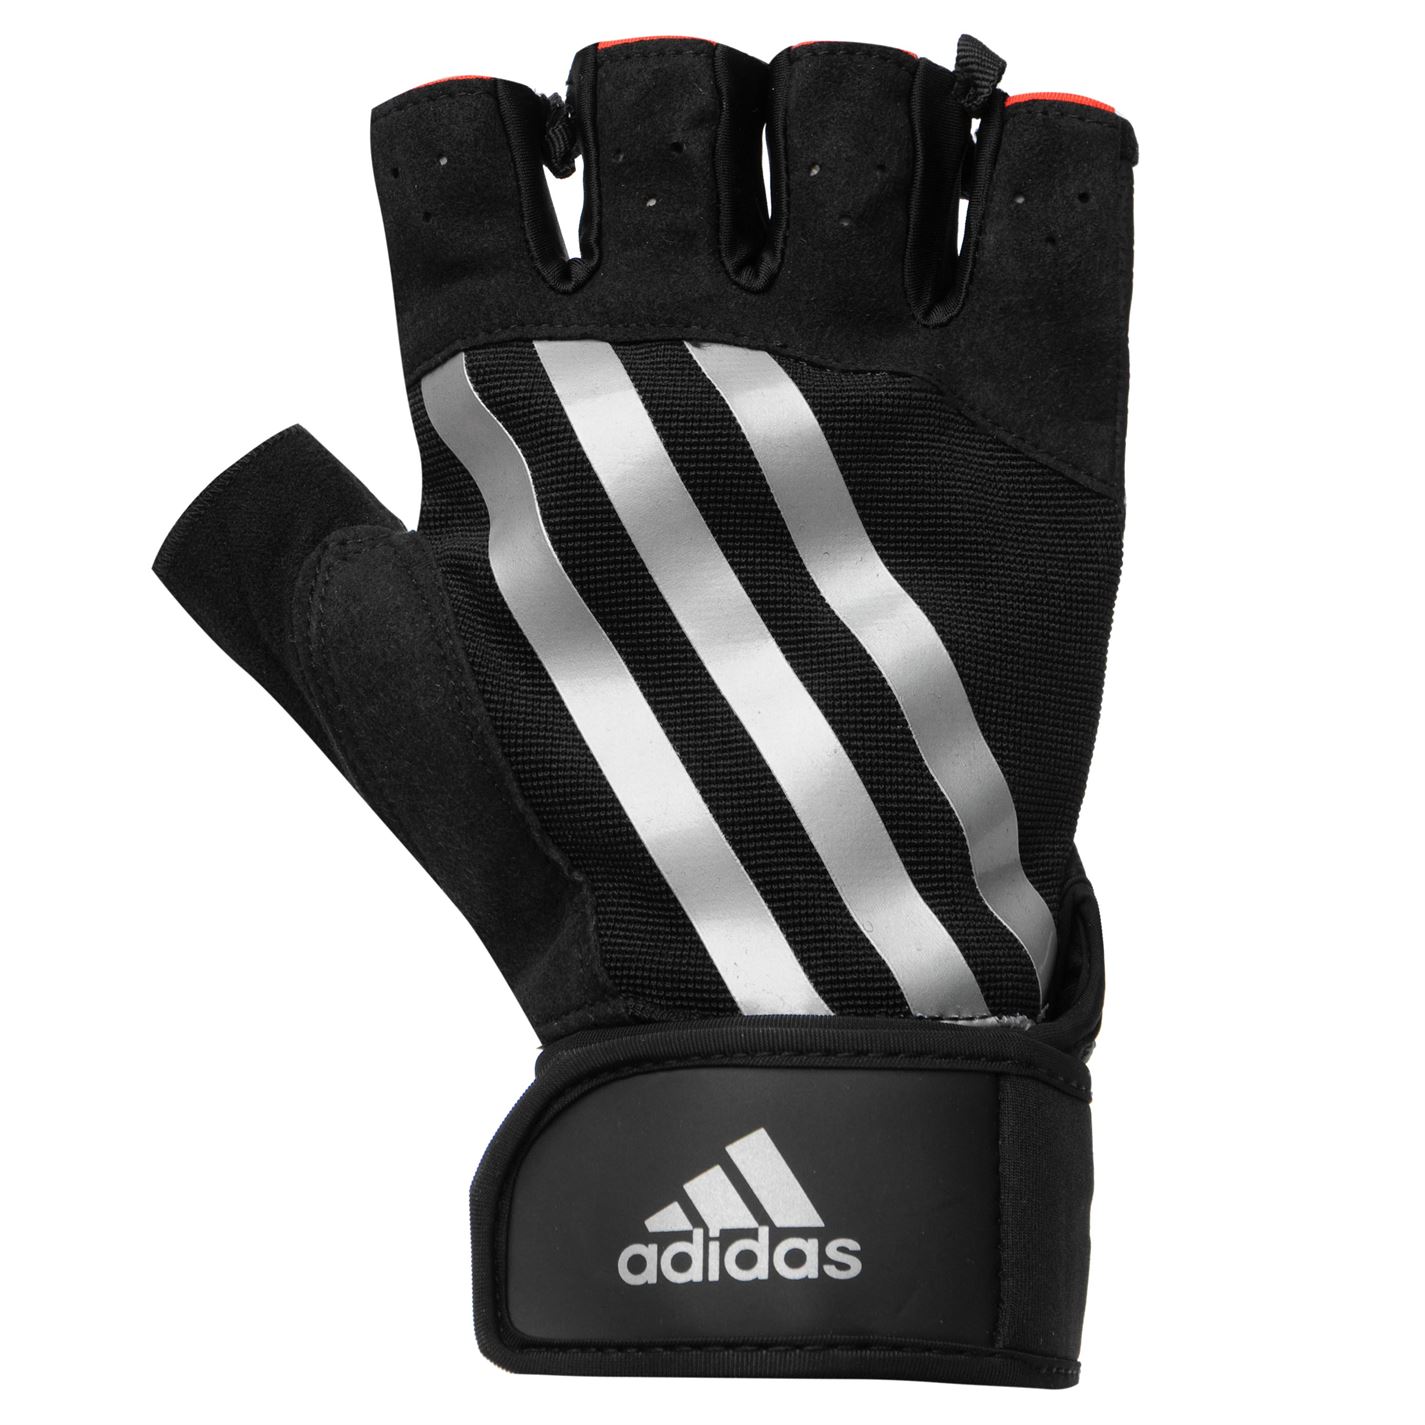  Adidas Workout Gloves for Weight Loss